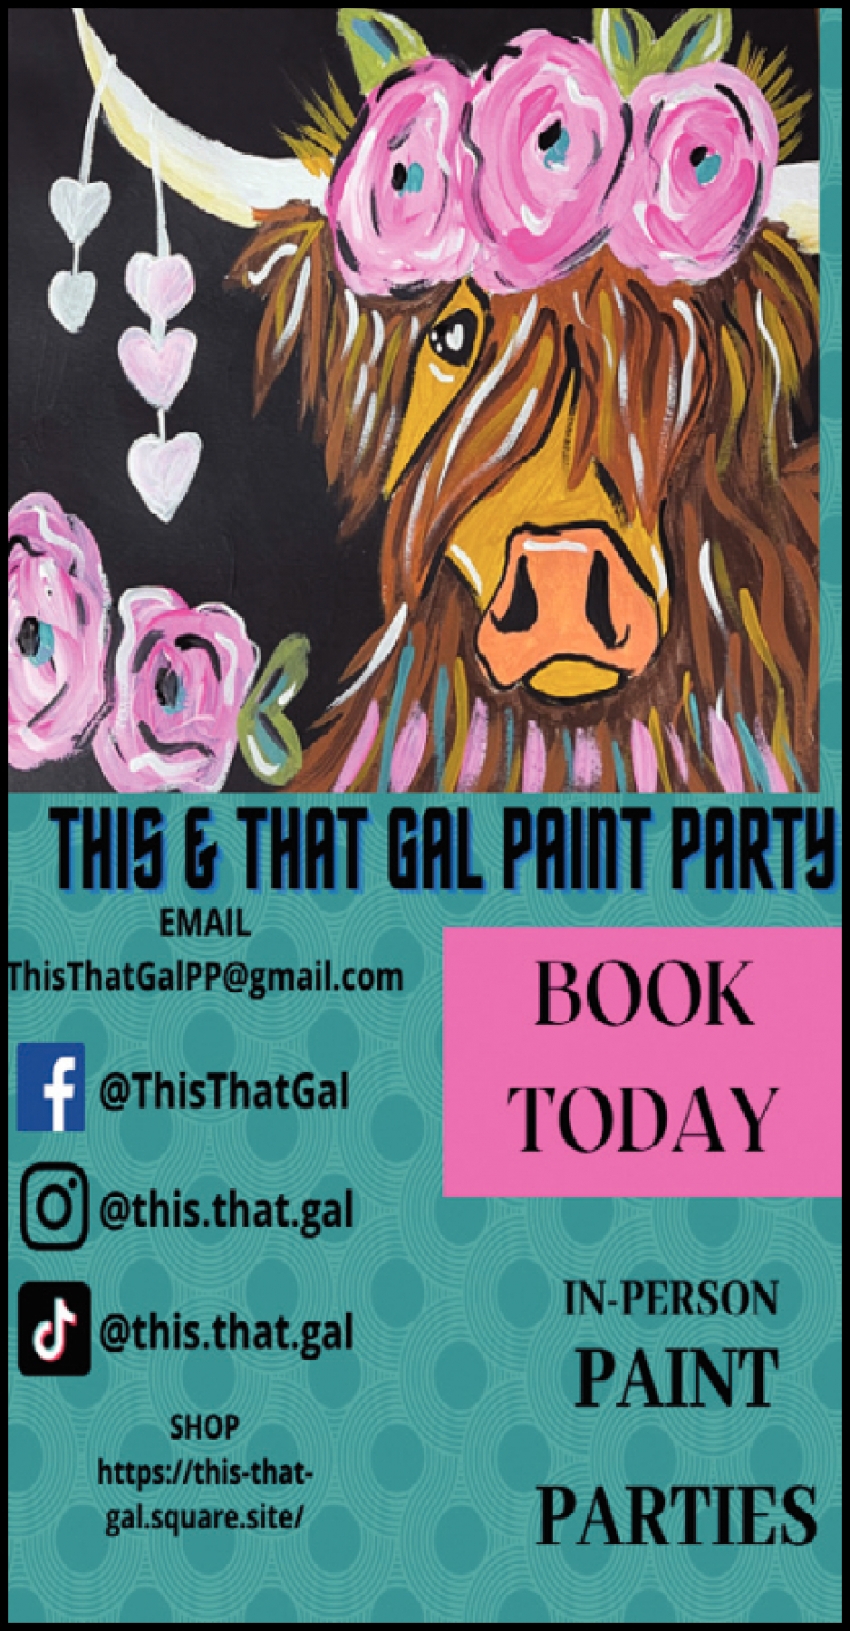 Home  This & That Gal Paint Party